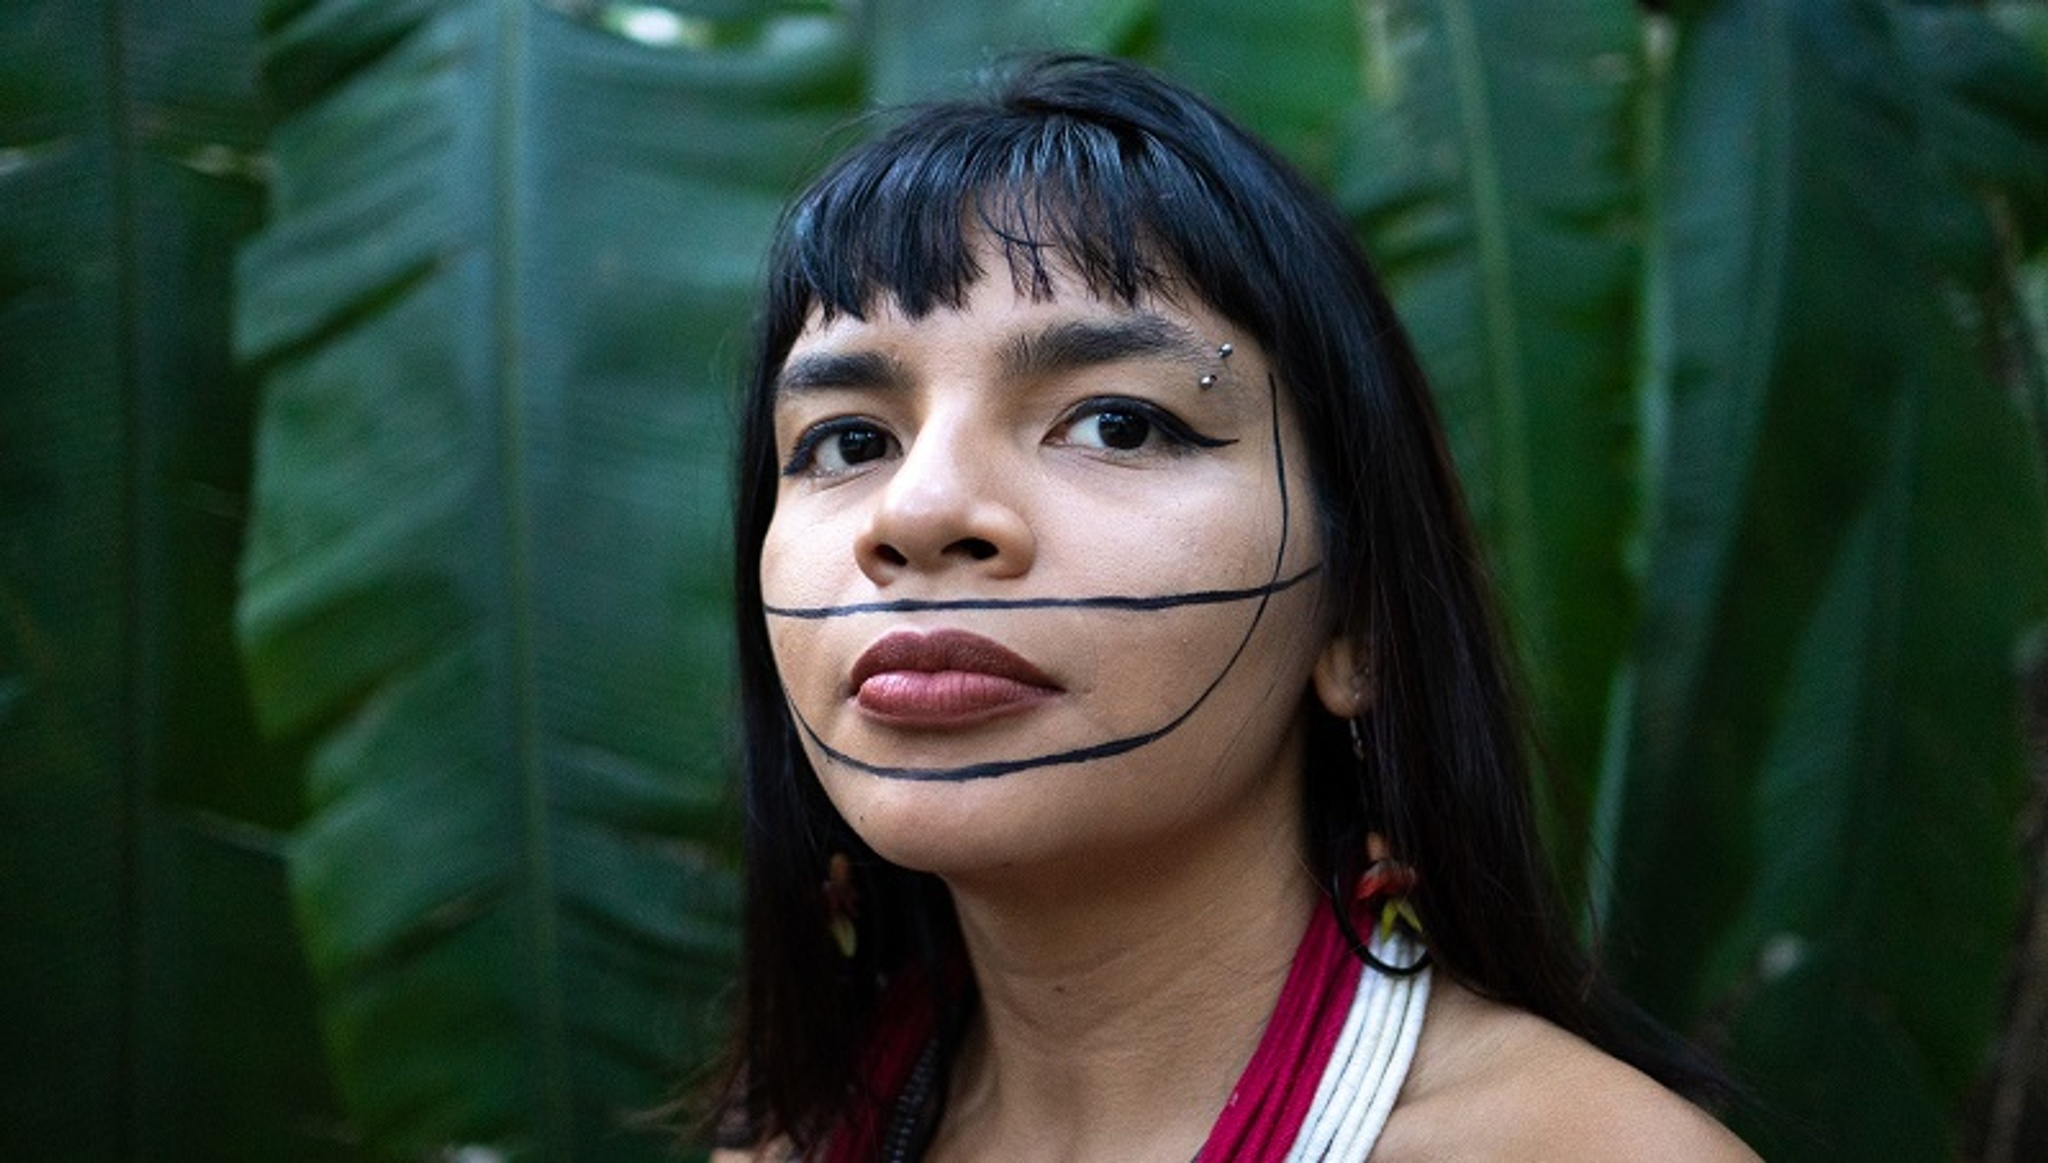 A portrait of Txai Suruí, and Indigenous woman from Brazil, who poses in front of large green leaves. She looks to the side and has a design of two black lines painted across her face. She has long black hair that falls beneath her shoulders and wears an eyebrow piercing at the end of her left eyebrow. 